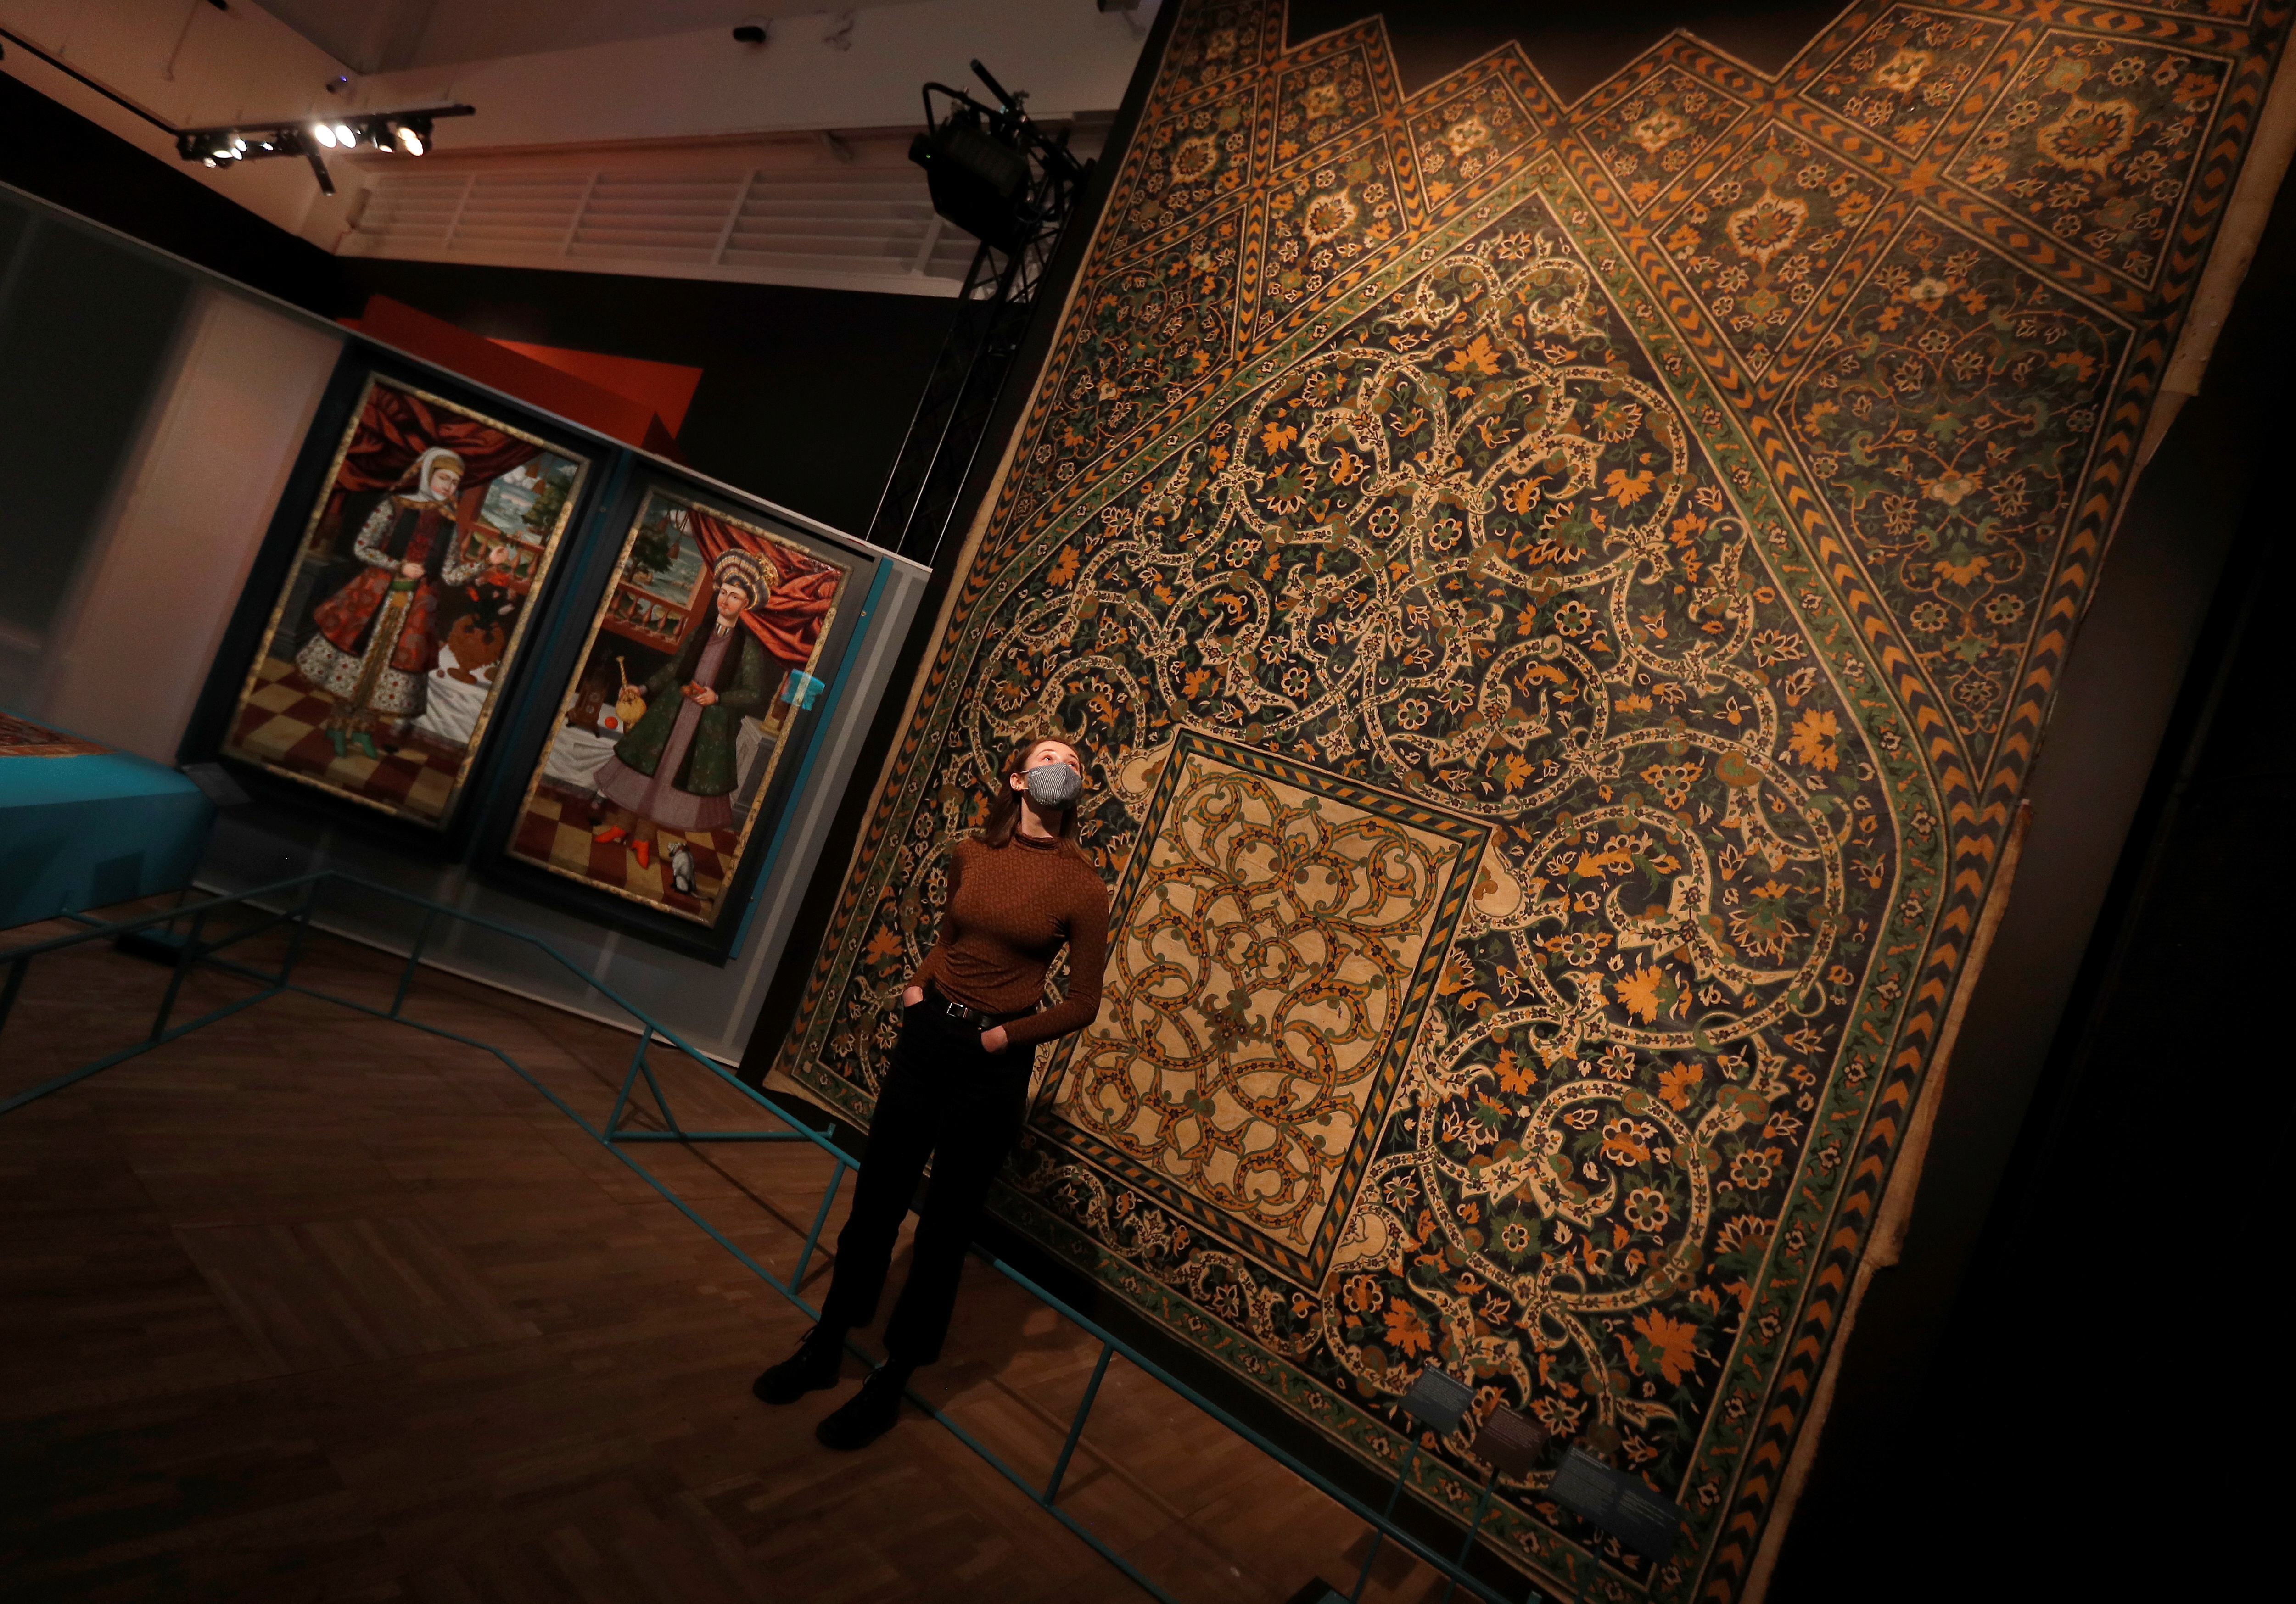 A V&A employee looks up at a full size replica of tiles from Isfahan on display at Epic Iran, an exhibition soon to open at the V&A in London, Britain, May 25, 2021. REUTERS/Peter Nicholls